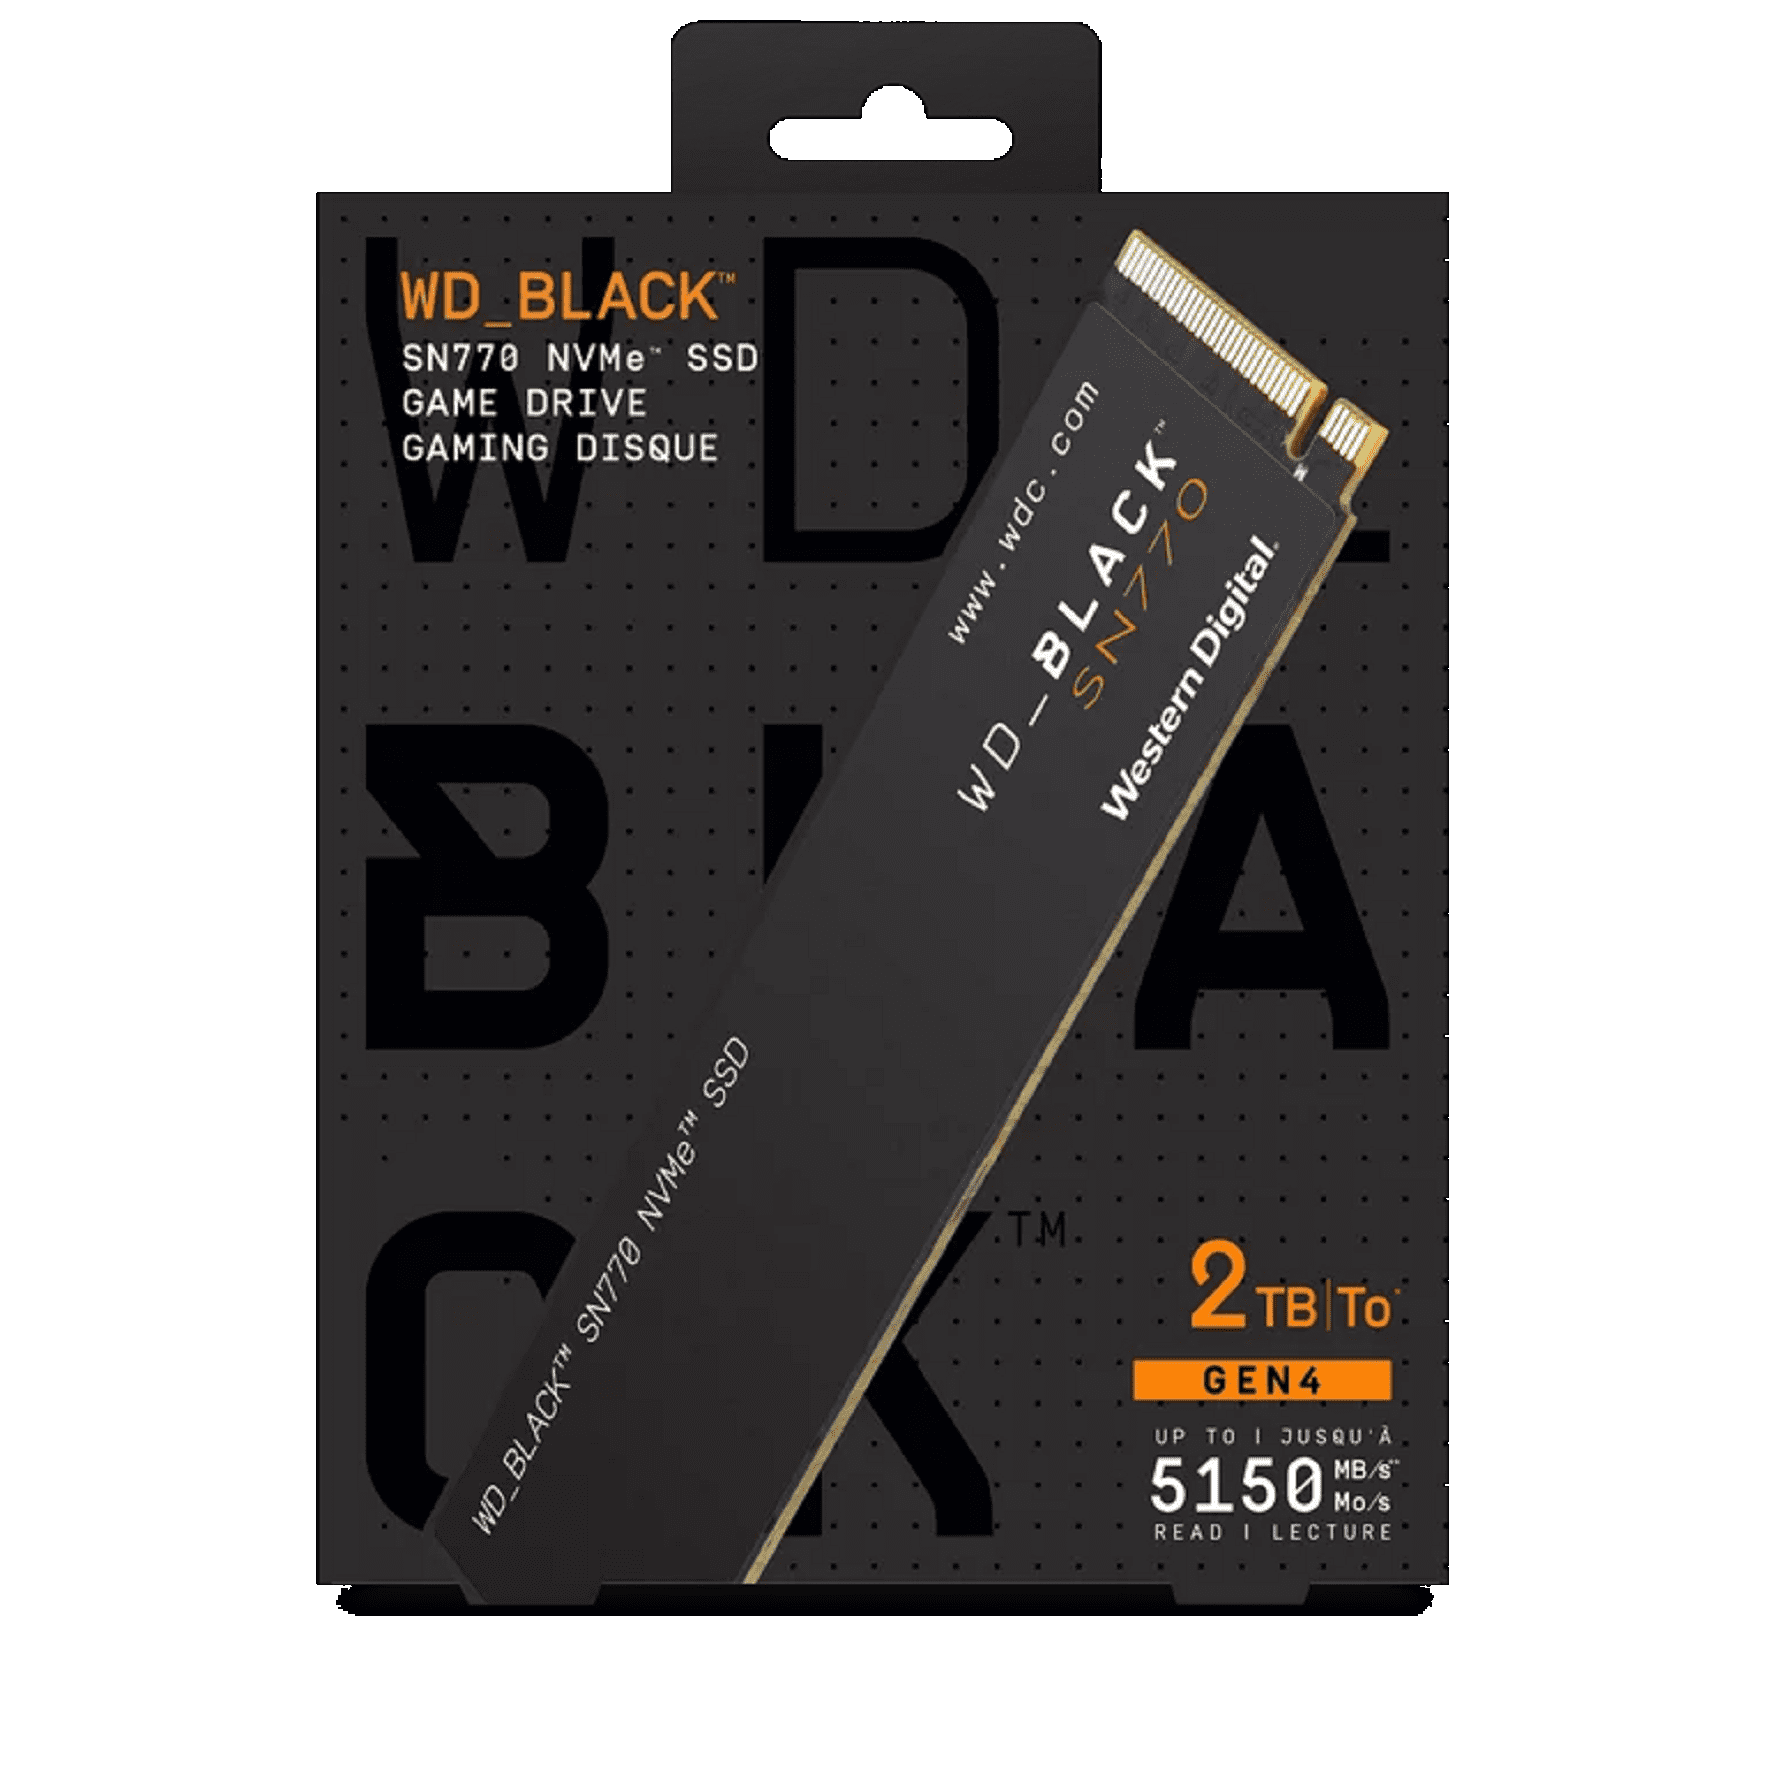 WD Black 1TB SN770 NVMe PCIe M.2 to up State , 2280, 5,150 WRWM Drive - Solid Gen4 MB/s WDBBDL0010BNC- Internal Gaming - SSD